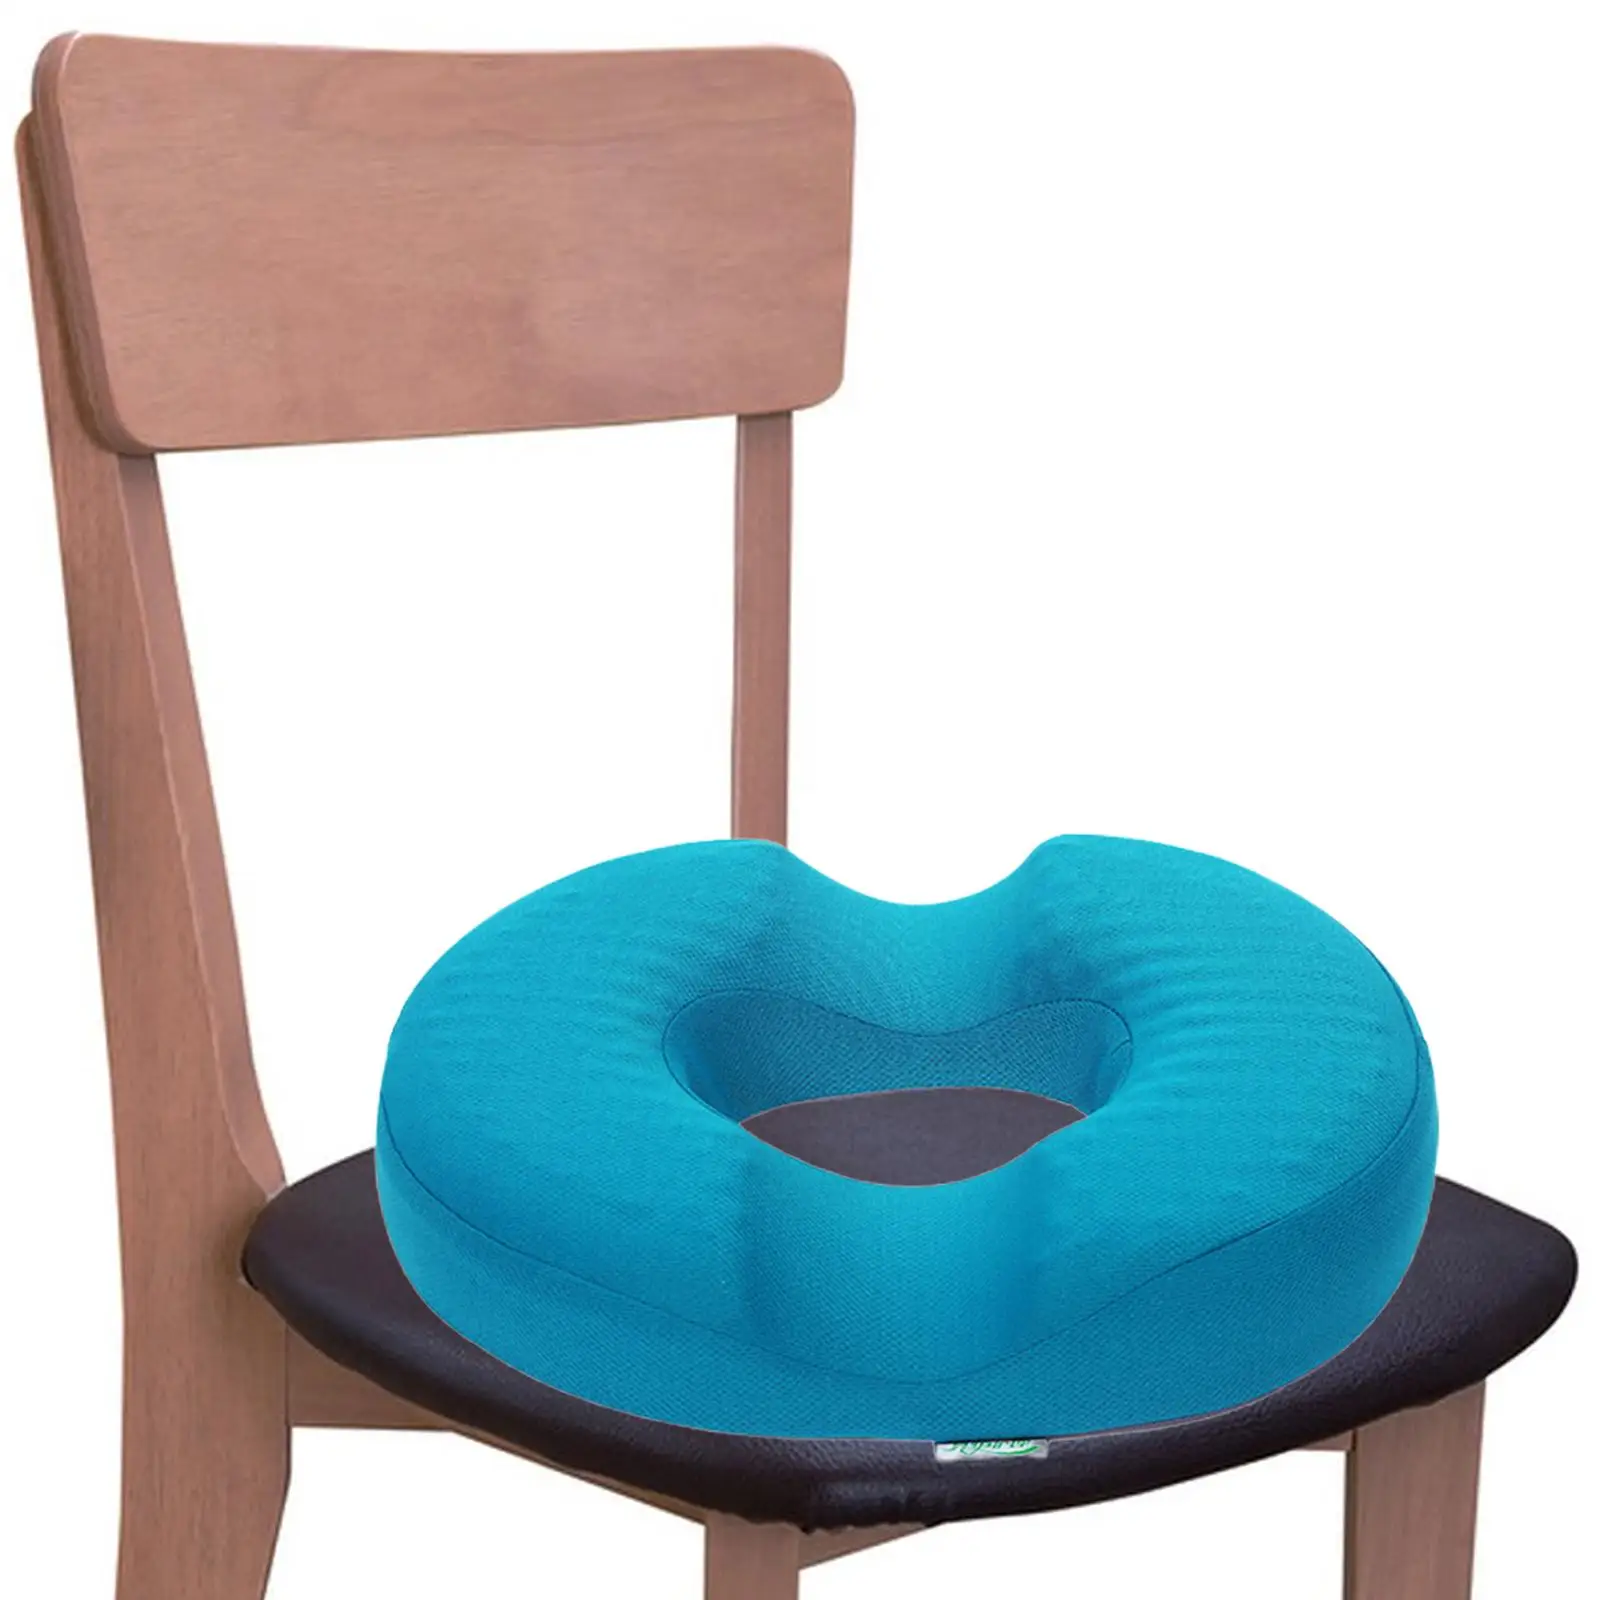 Donut Chair Cushion Adults Elderly Portable for Long Travel for Home Office Car Memory Foam Seat Cushion Lightweight Memory Foam